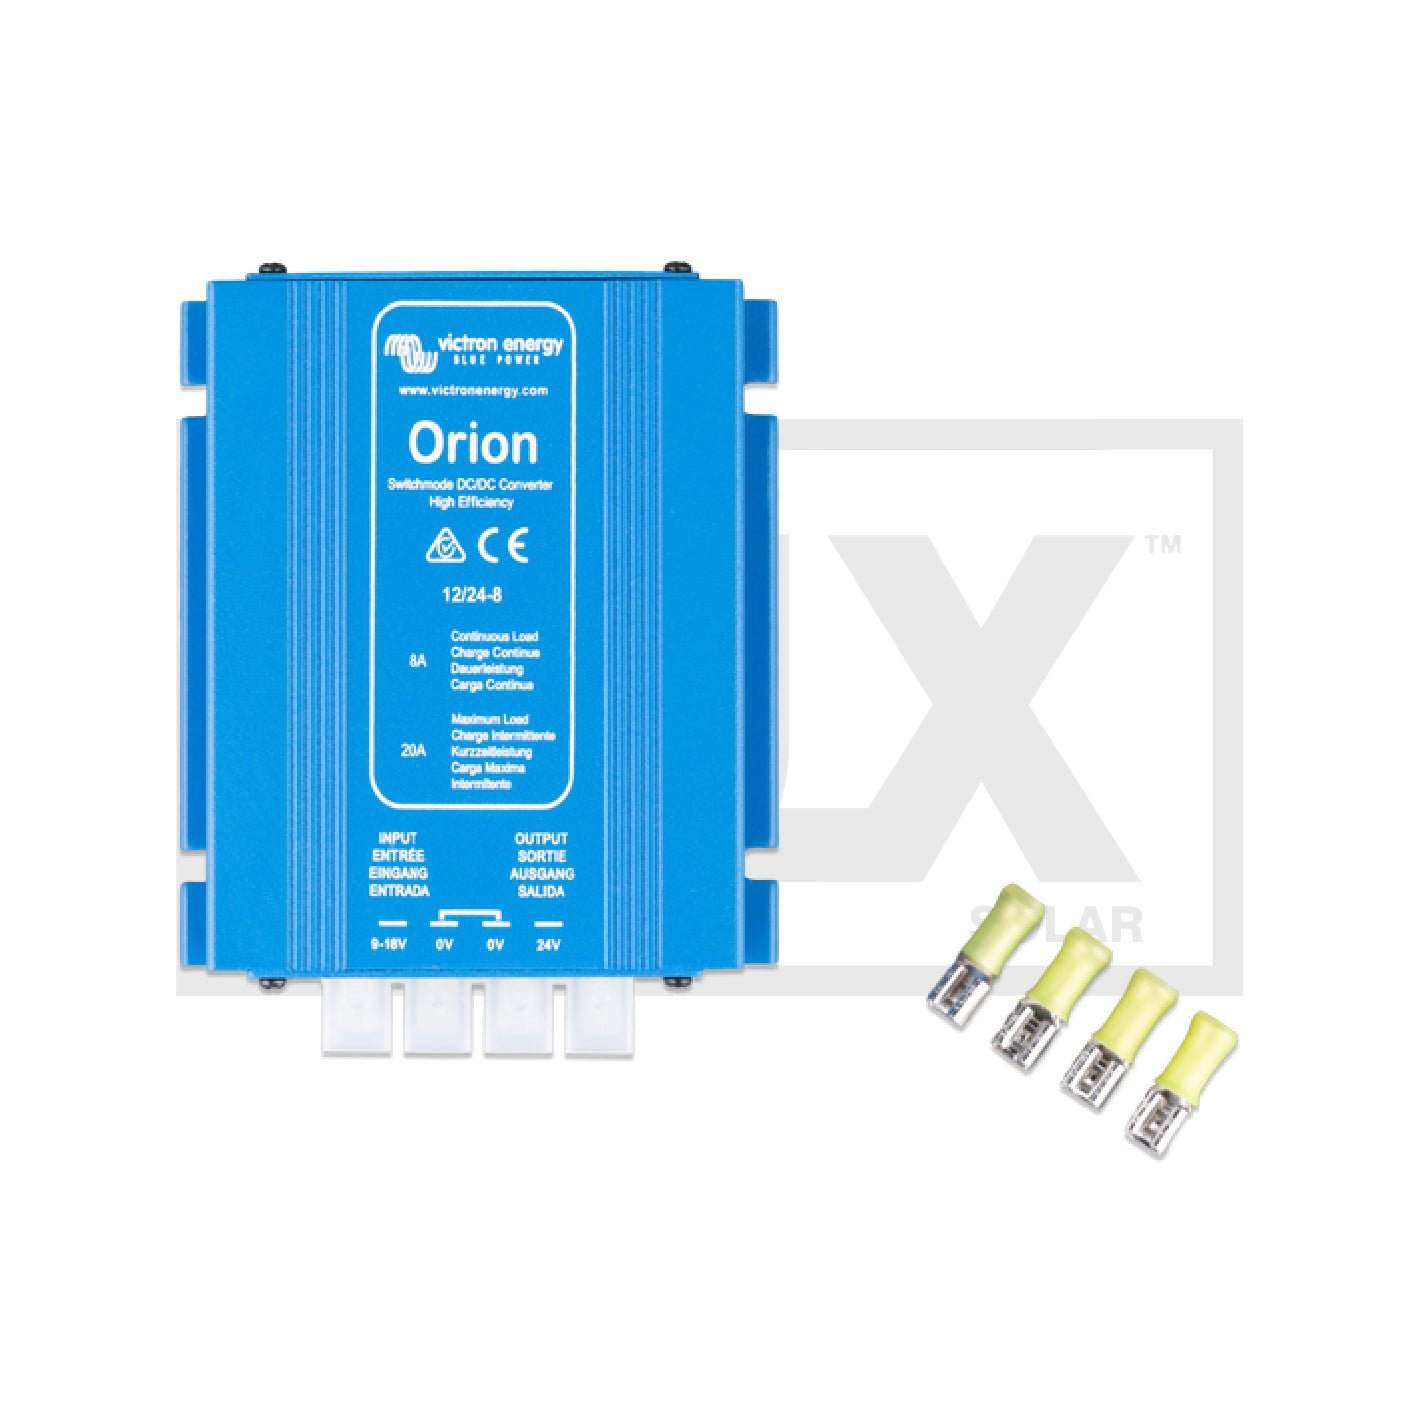 Victron Orion  DC-DC Converter   (Non-Isolated)